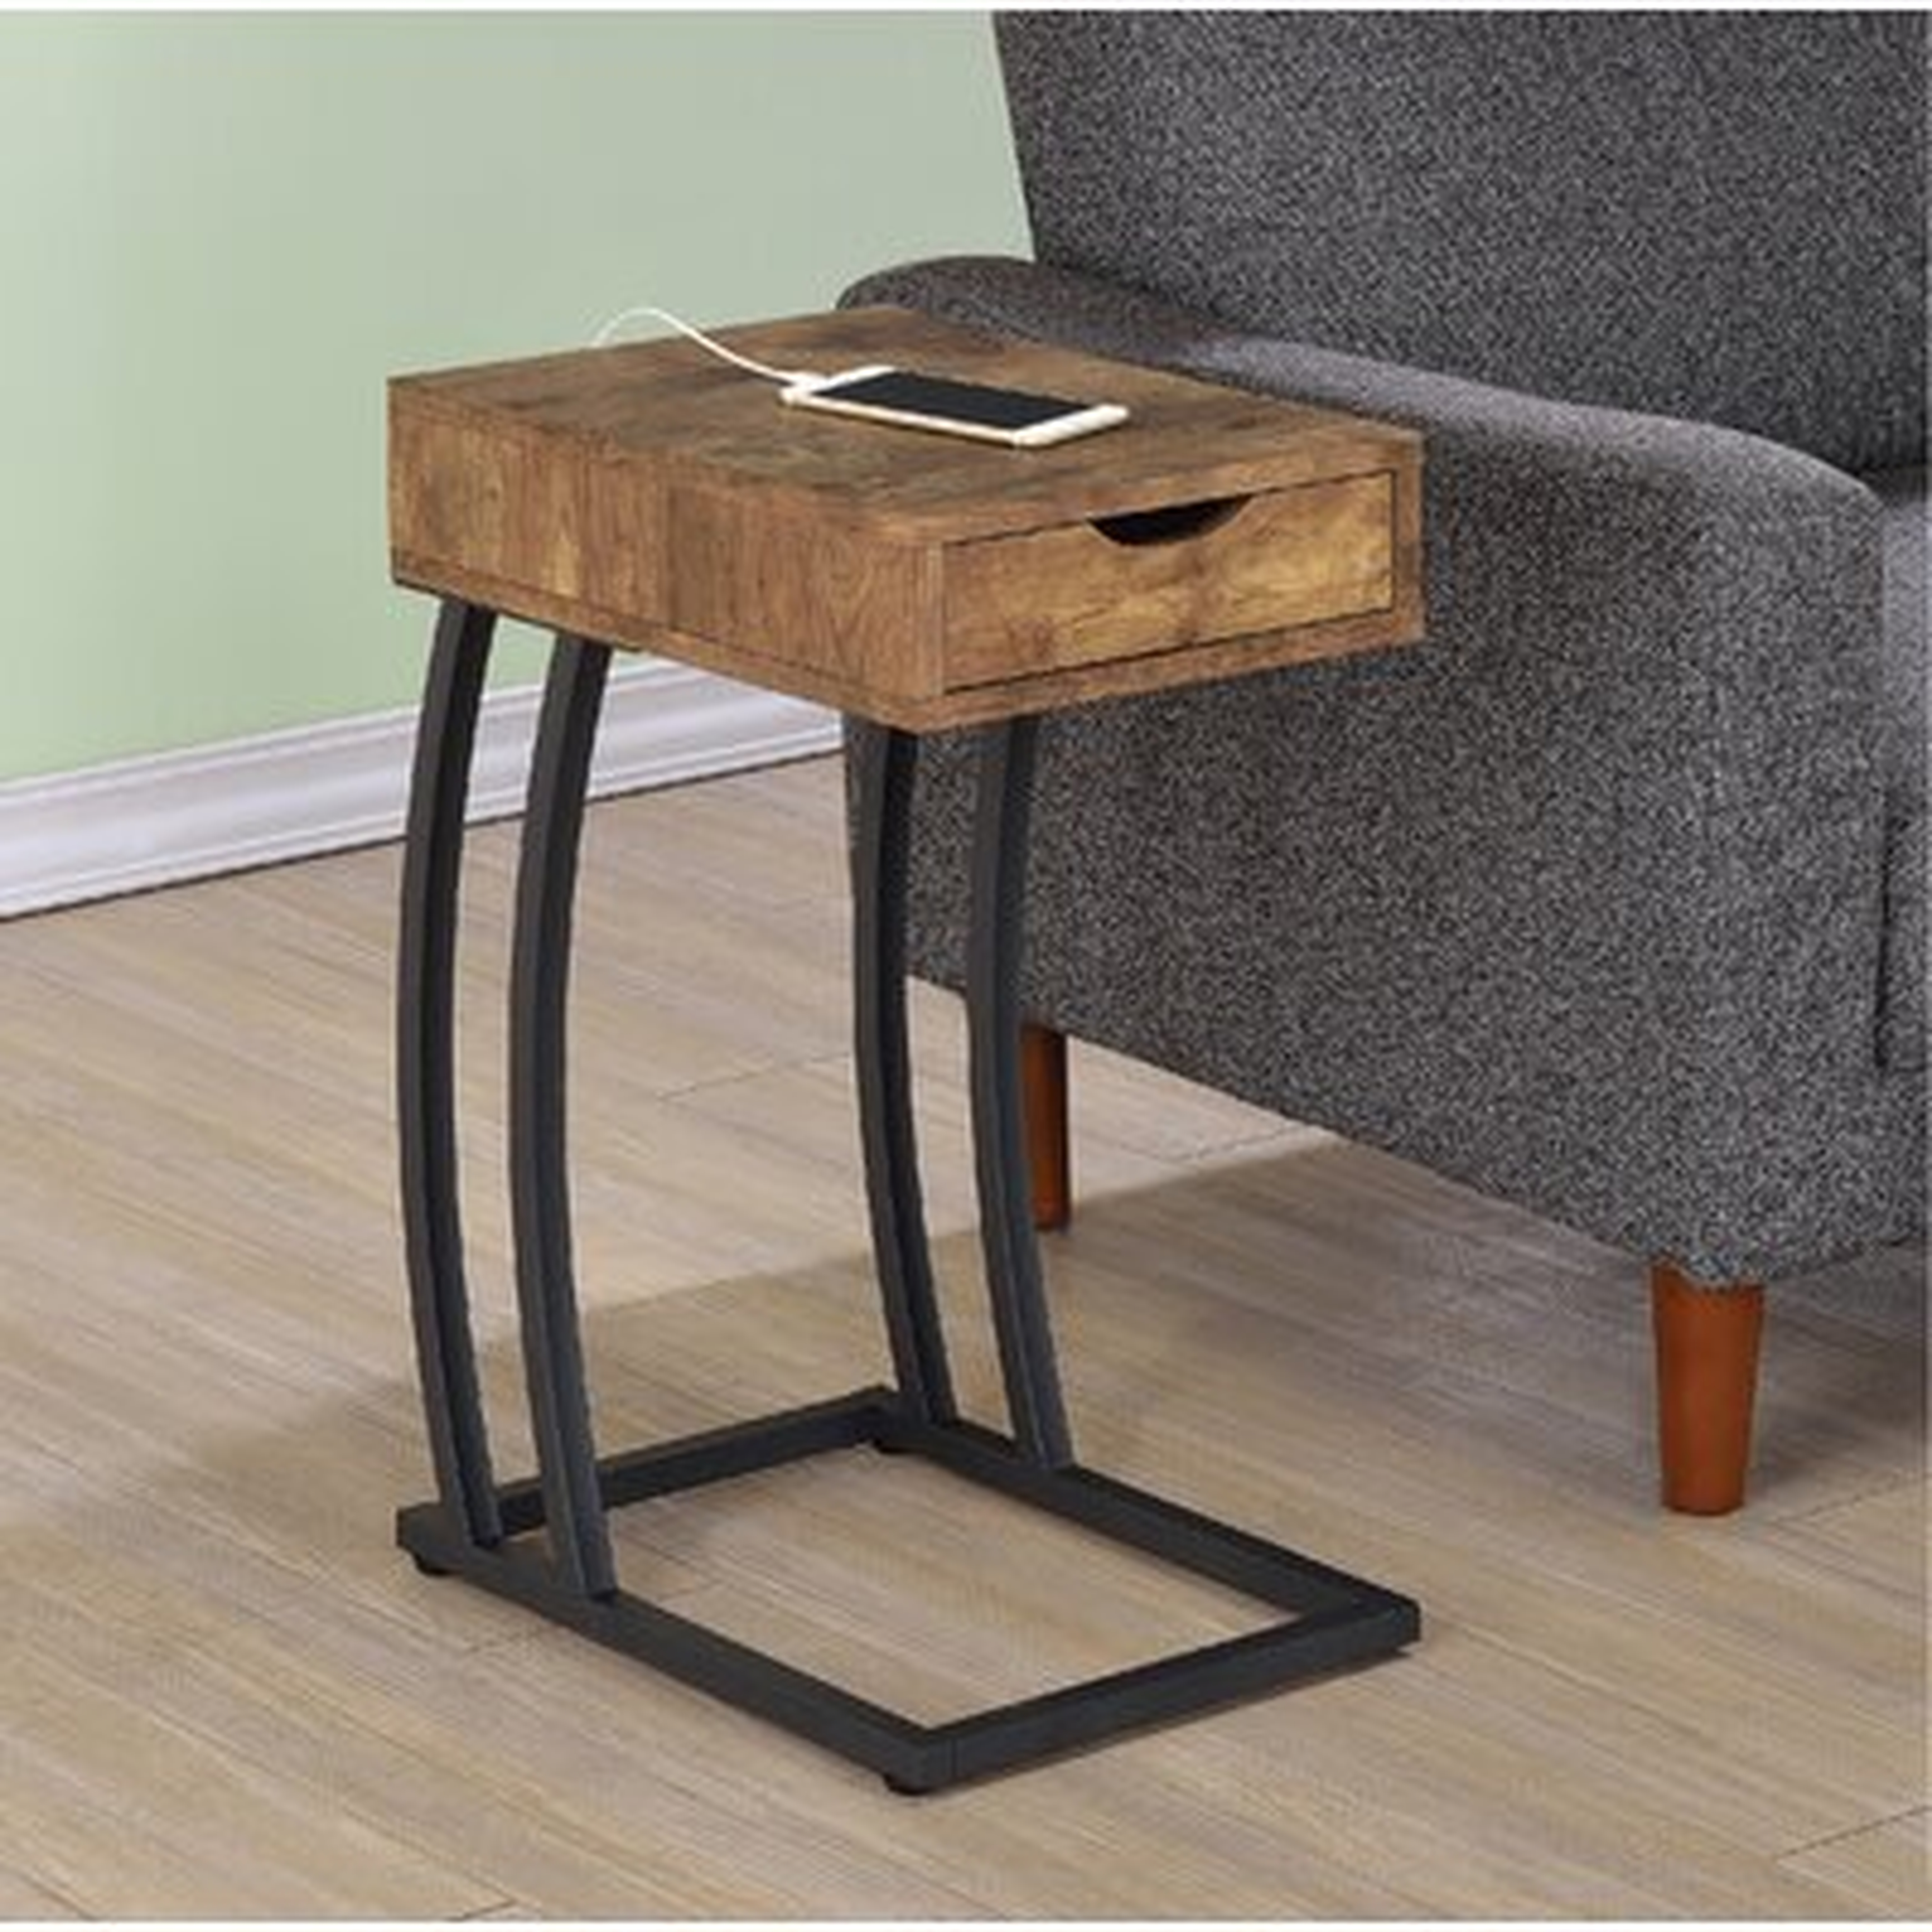 Mantua C Table End Table with Storage and Built-In Outlets - Wayfair